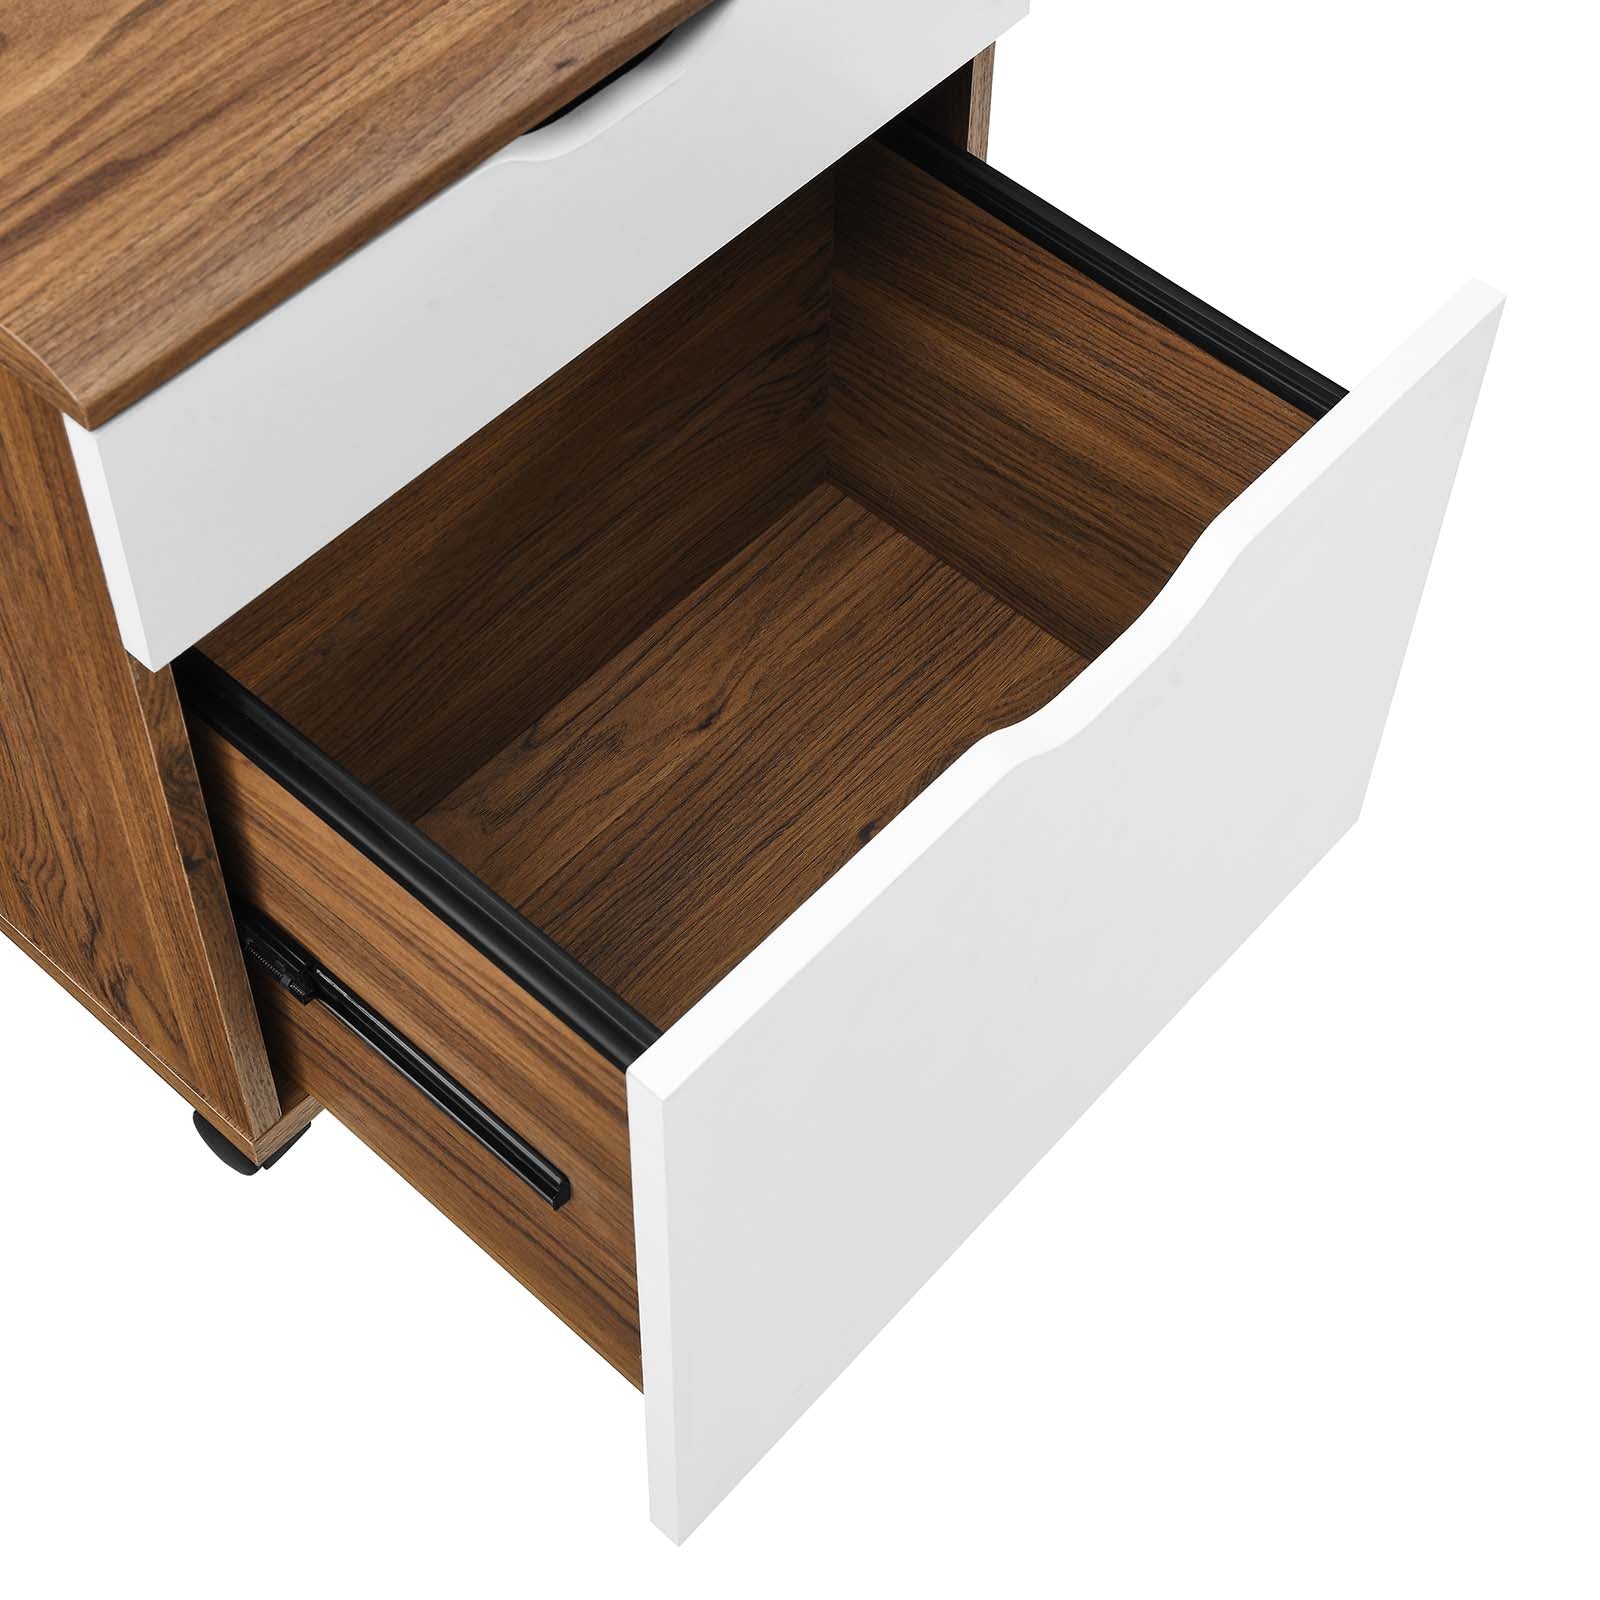 Modway File Cabinets - Envision Wood File Cabinet Walnut White